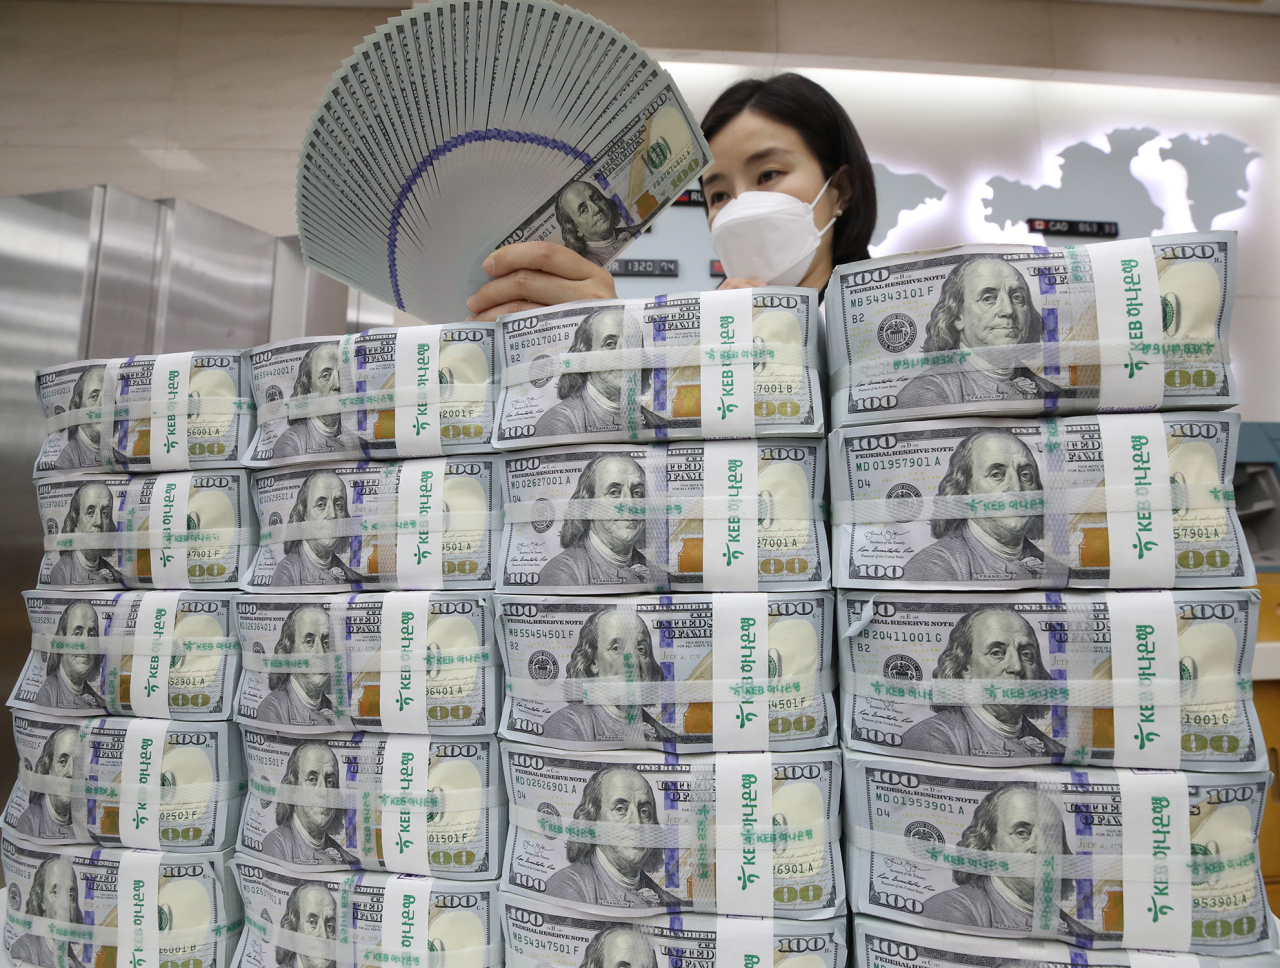 This file photo shows a Hana Bank official in Seoul inspecting US banknotes before their release into the local financial market. (Yonhap)